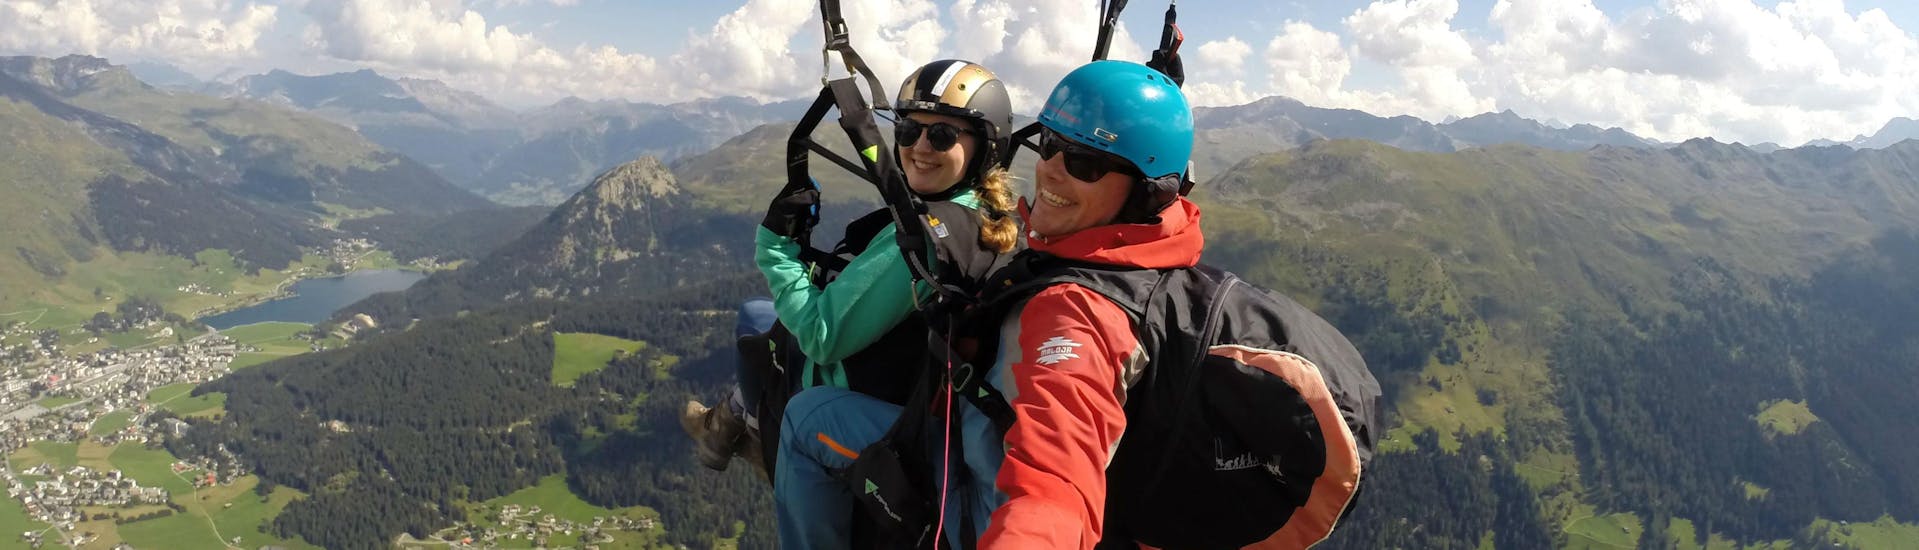 Tandem Paragliding in Davos Klosters.